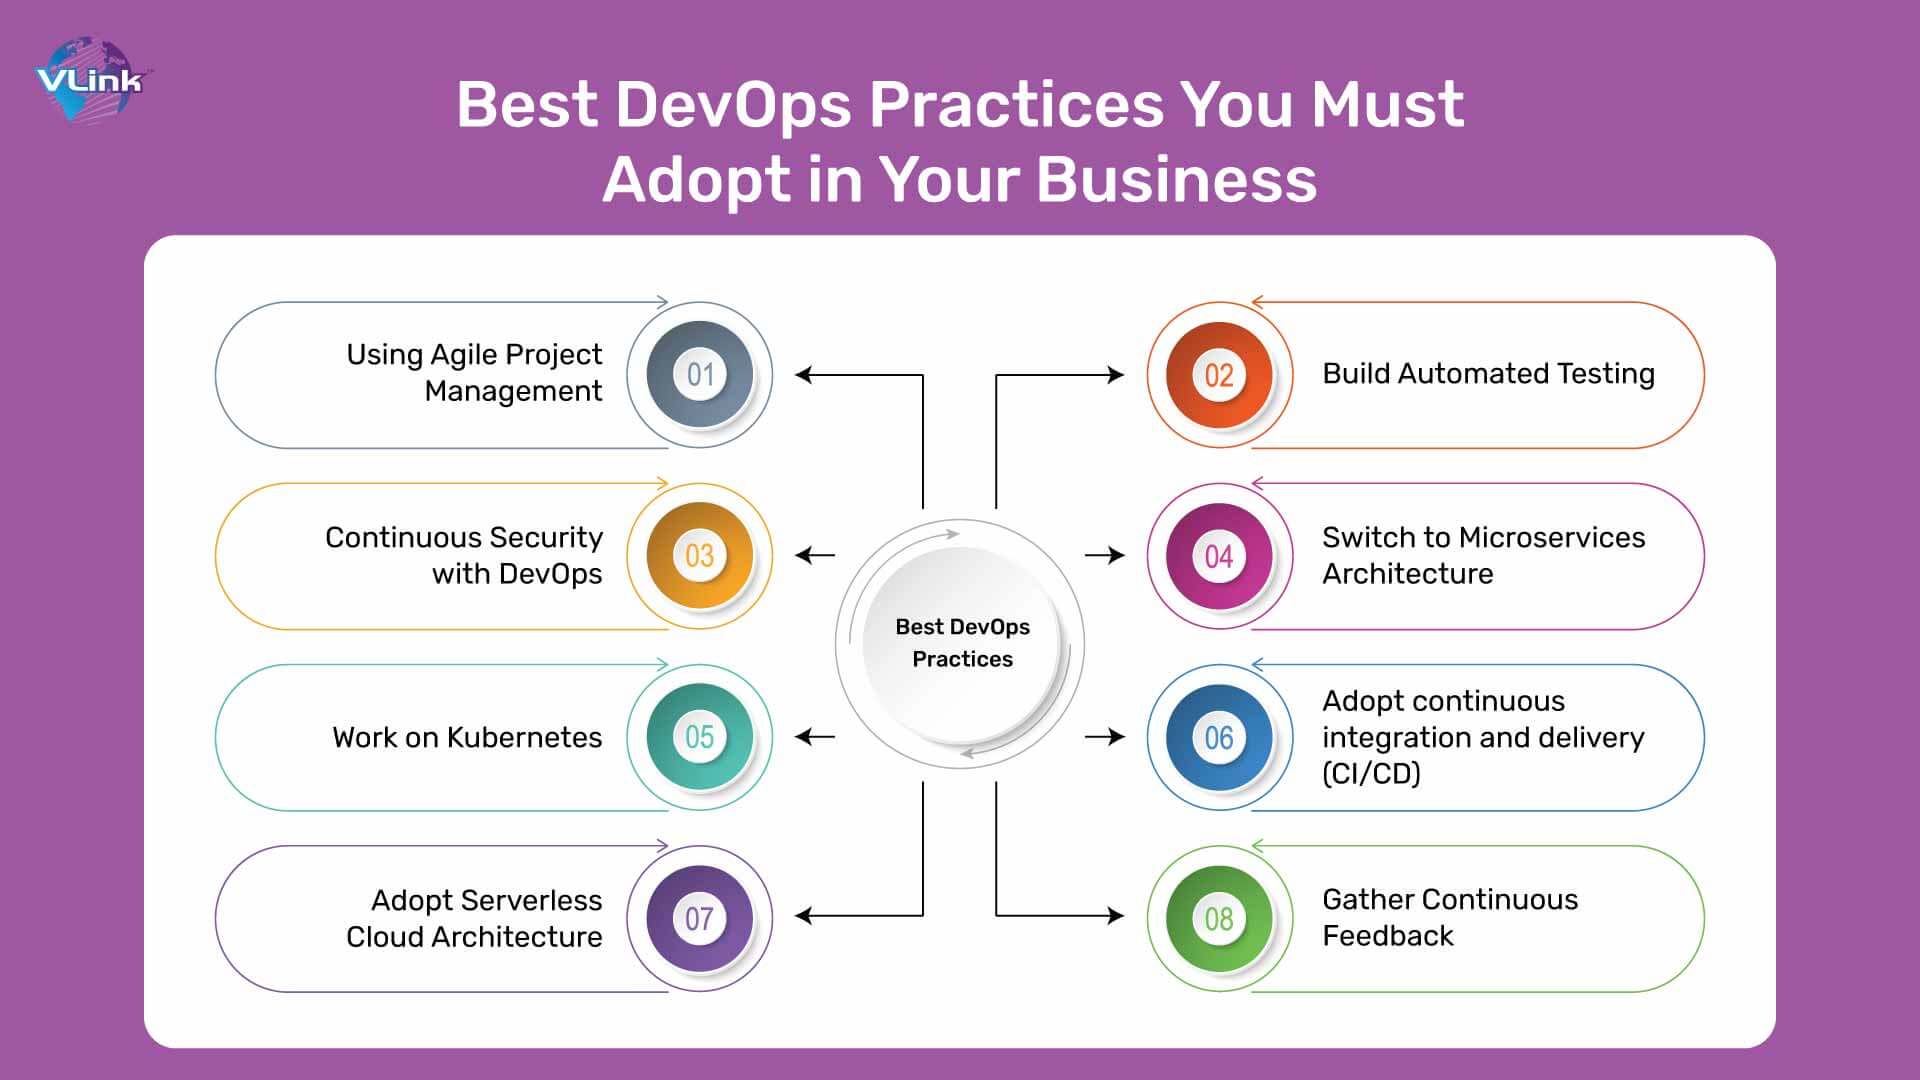 Best DevOps Practices You Must Adopt in Your Business